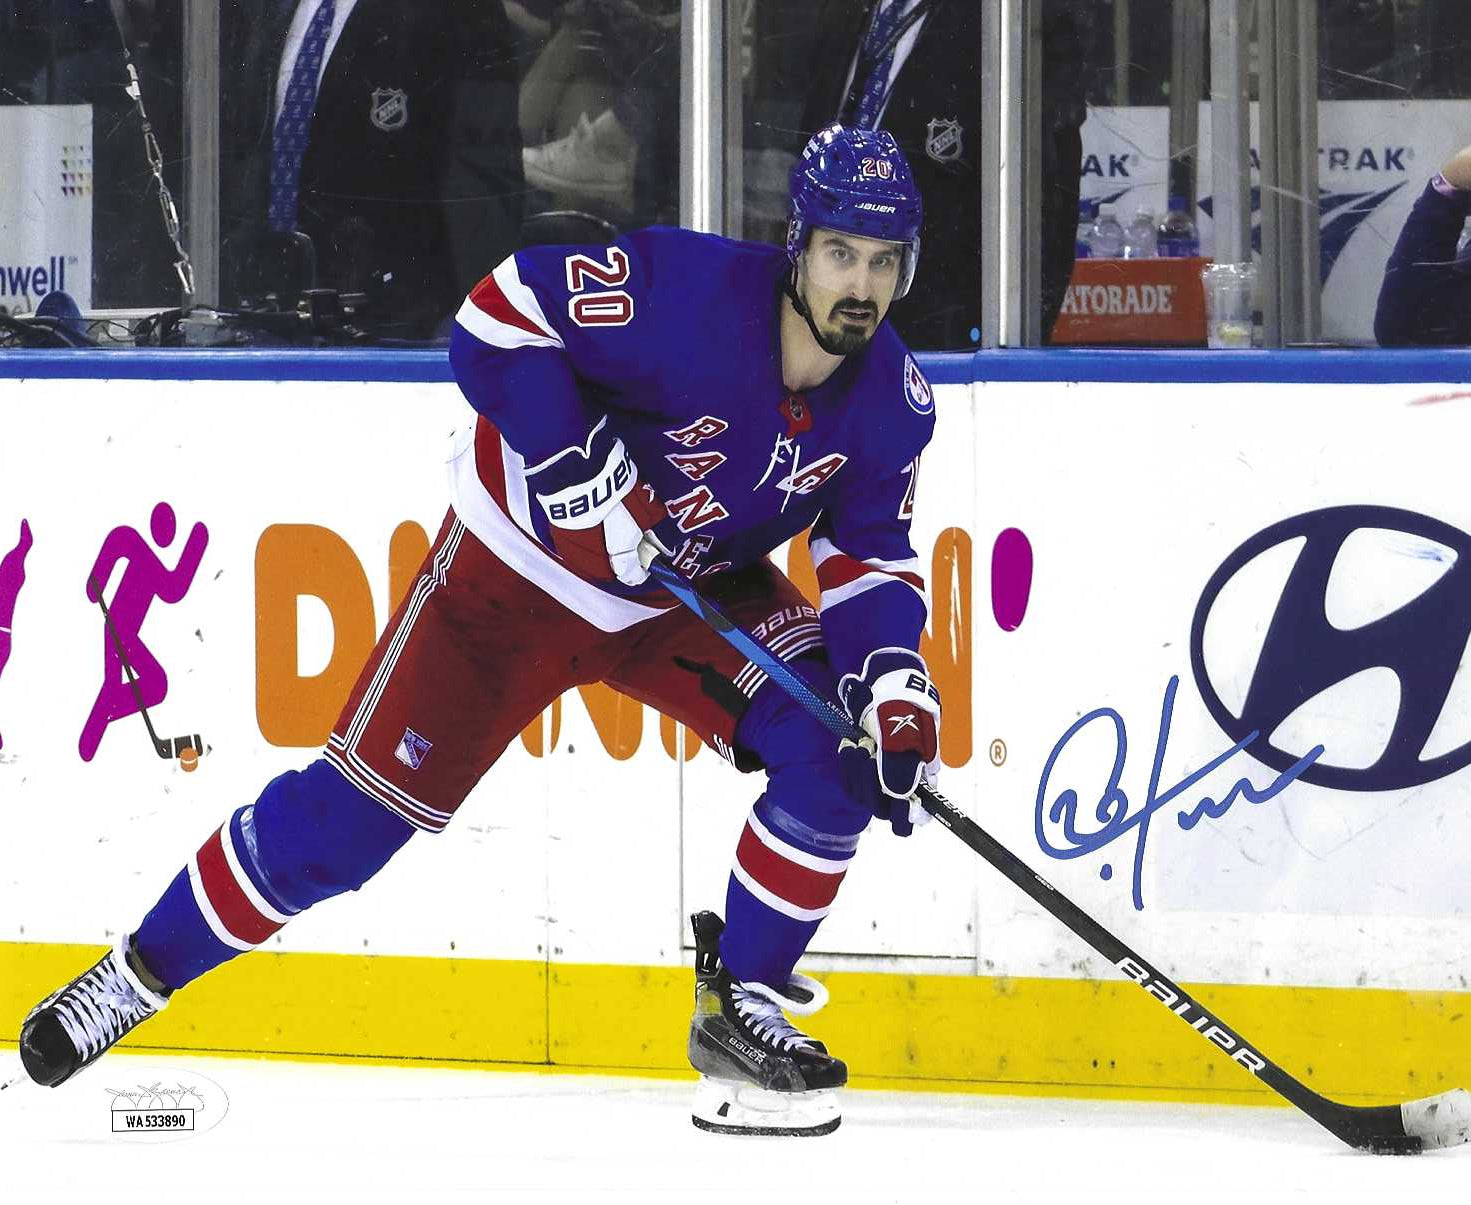 New York Rangers Brian Leetch Jersey Retirement Ceremony, Autographed 8x10  photo picture